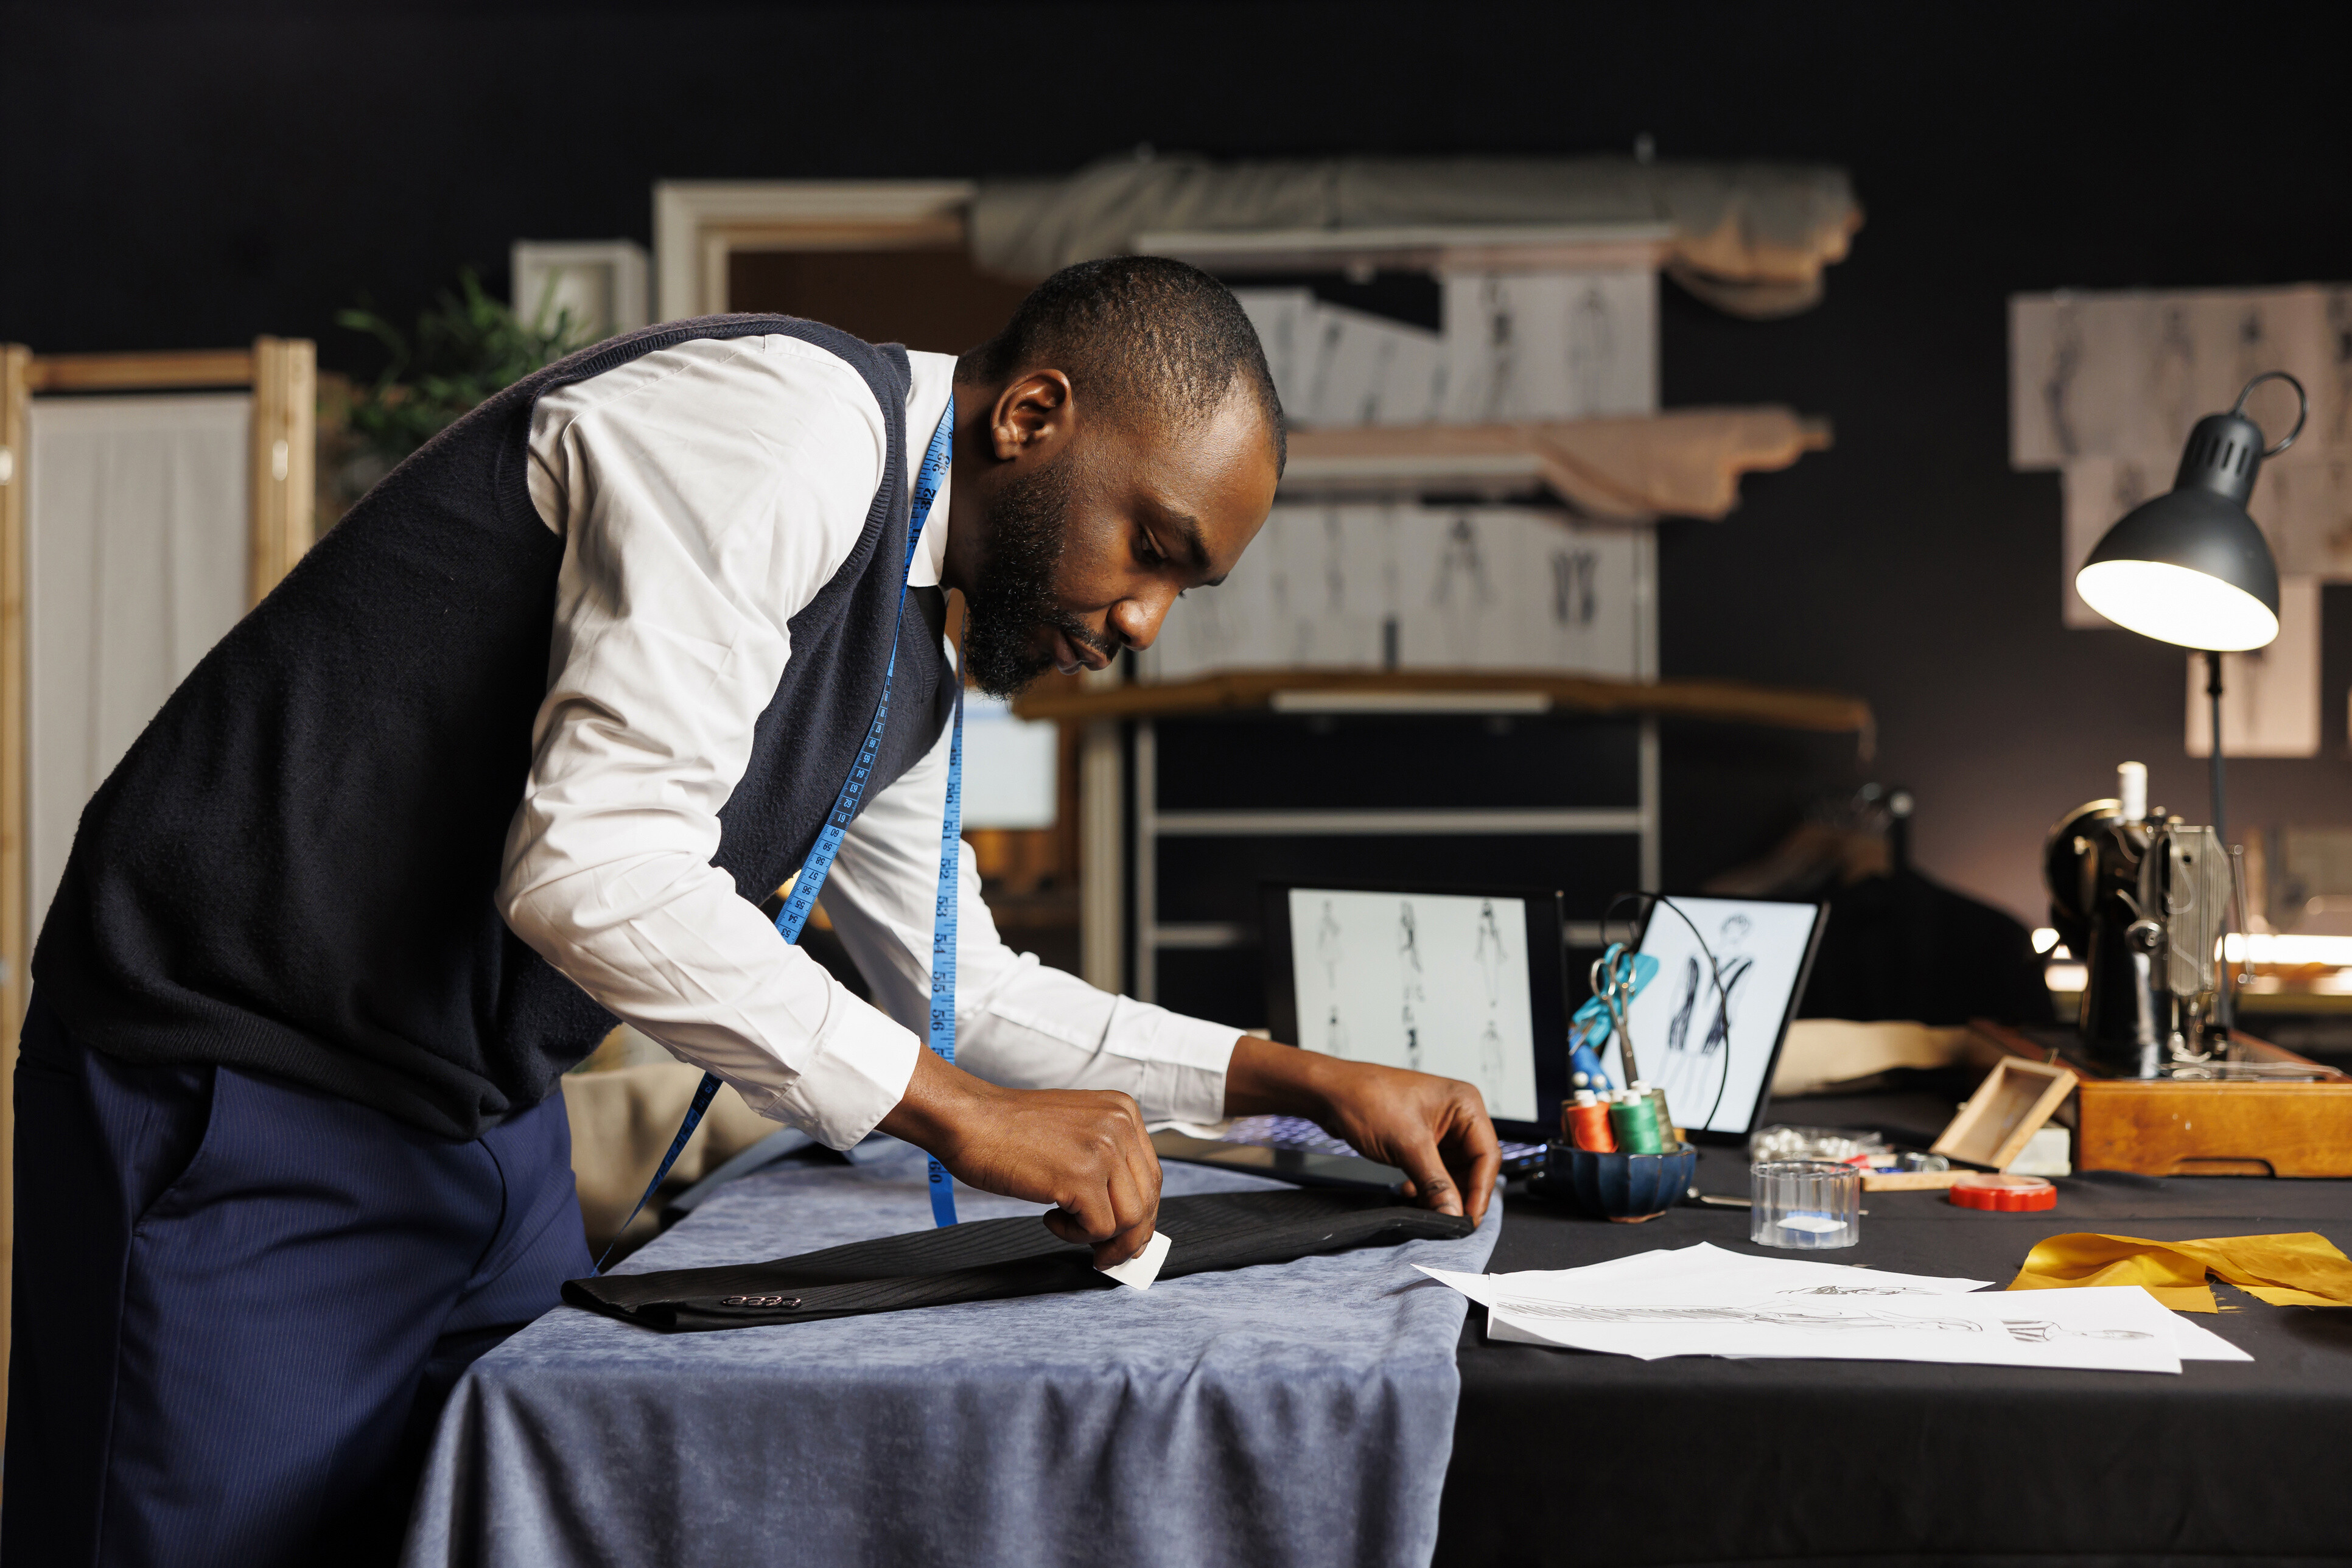 A suit tailor making alterations on a suit sleeve in his workspace.